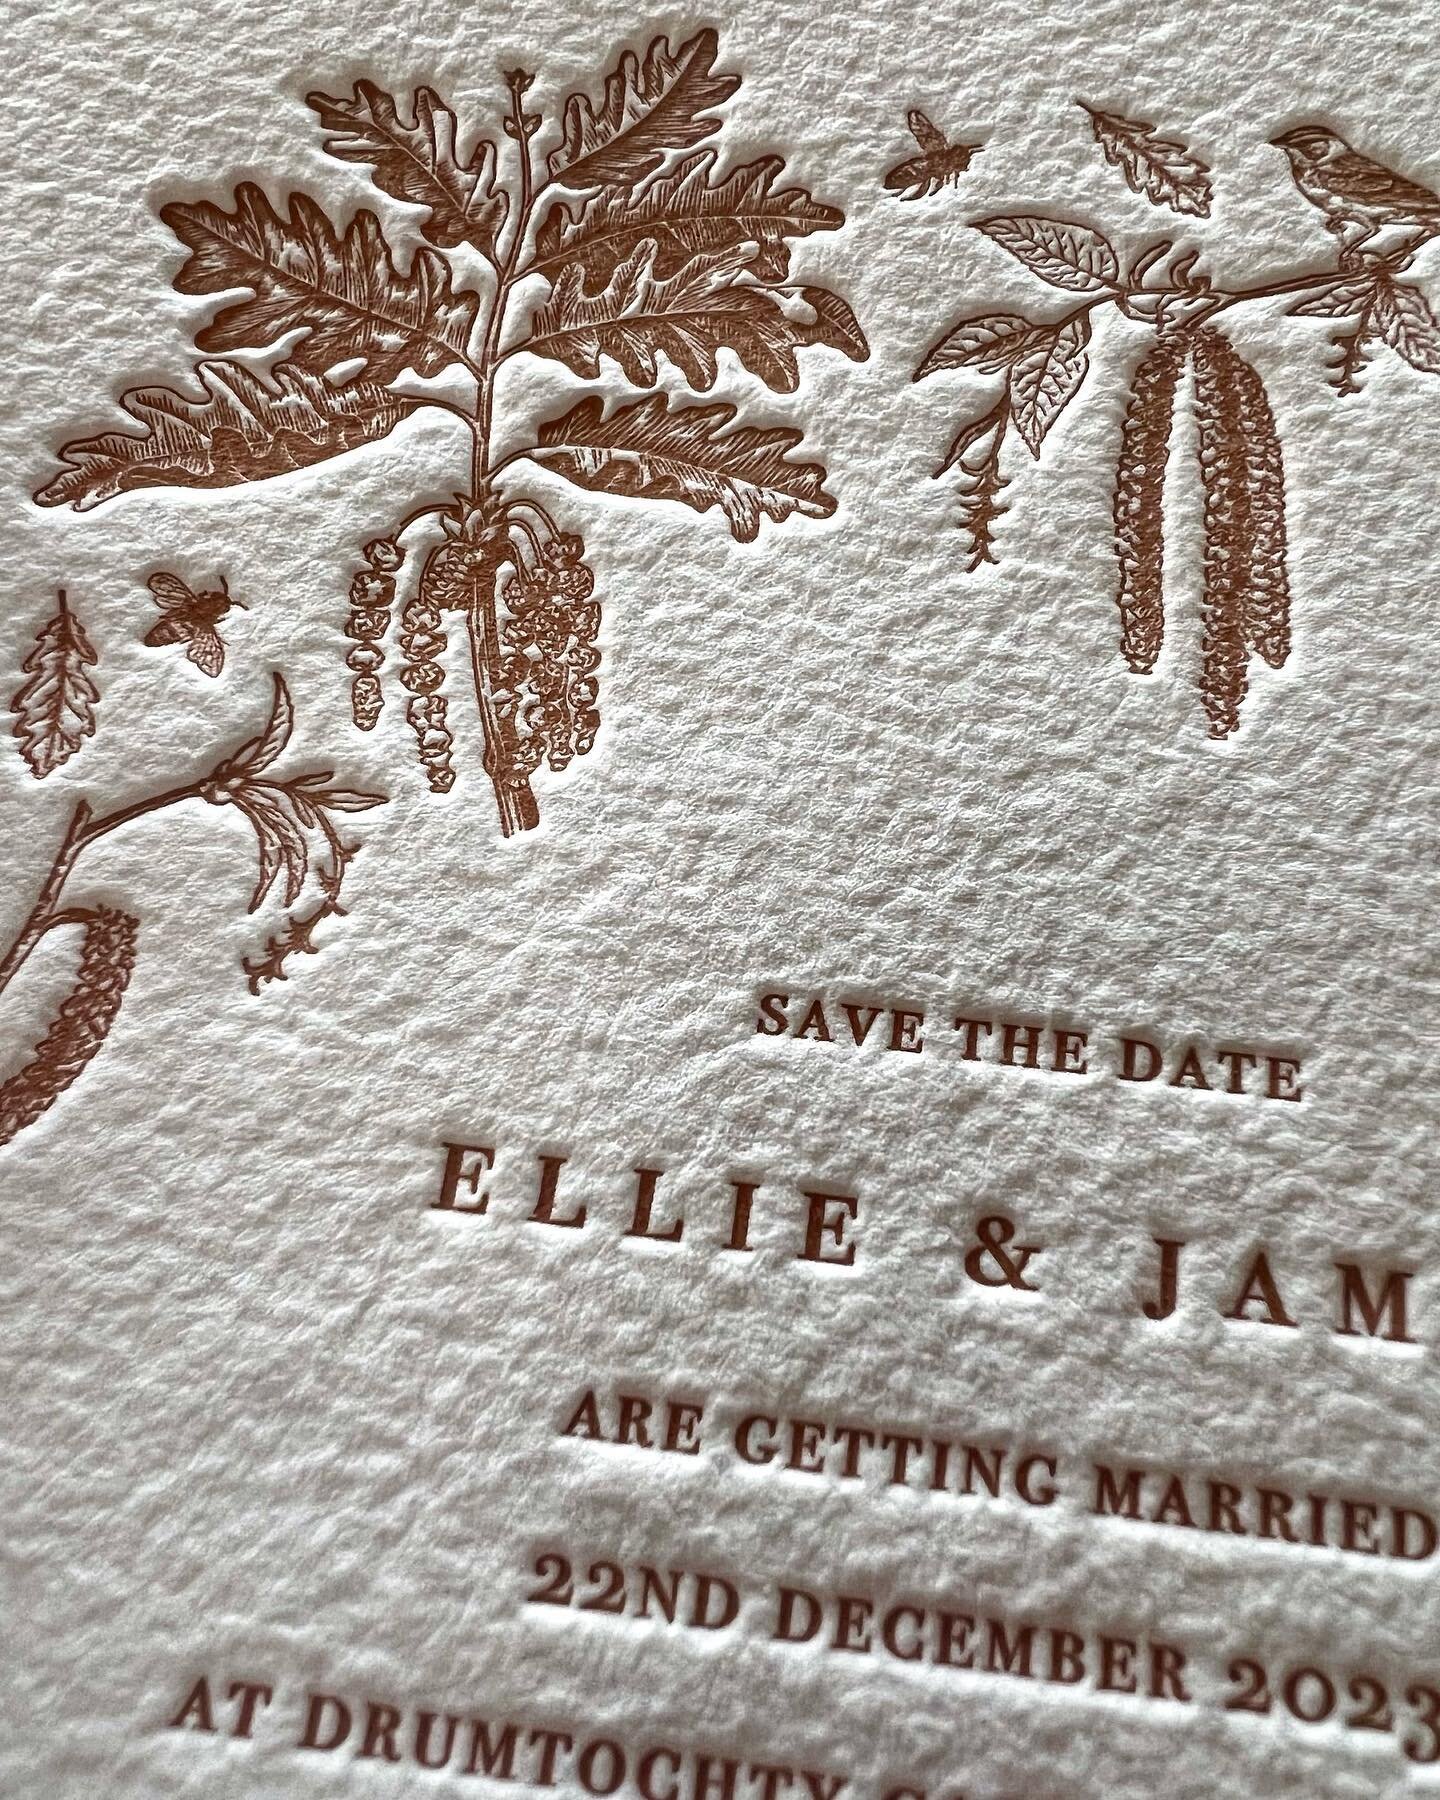 A recent custom design - an adaptation of one of our ranges. The brief was to create some intricate woodland themed illustrations to compliment the couple&rsquo;s forthcoming event. Printed in a rusty orange ink of 100% rough cotton paper. #letterpre